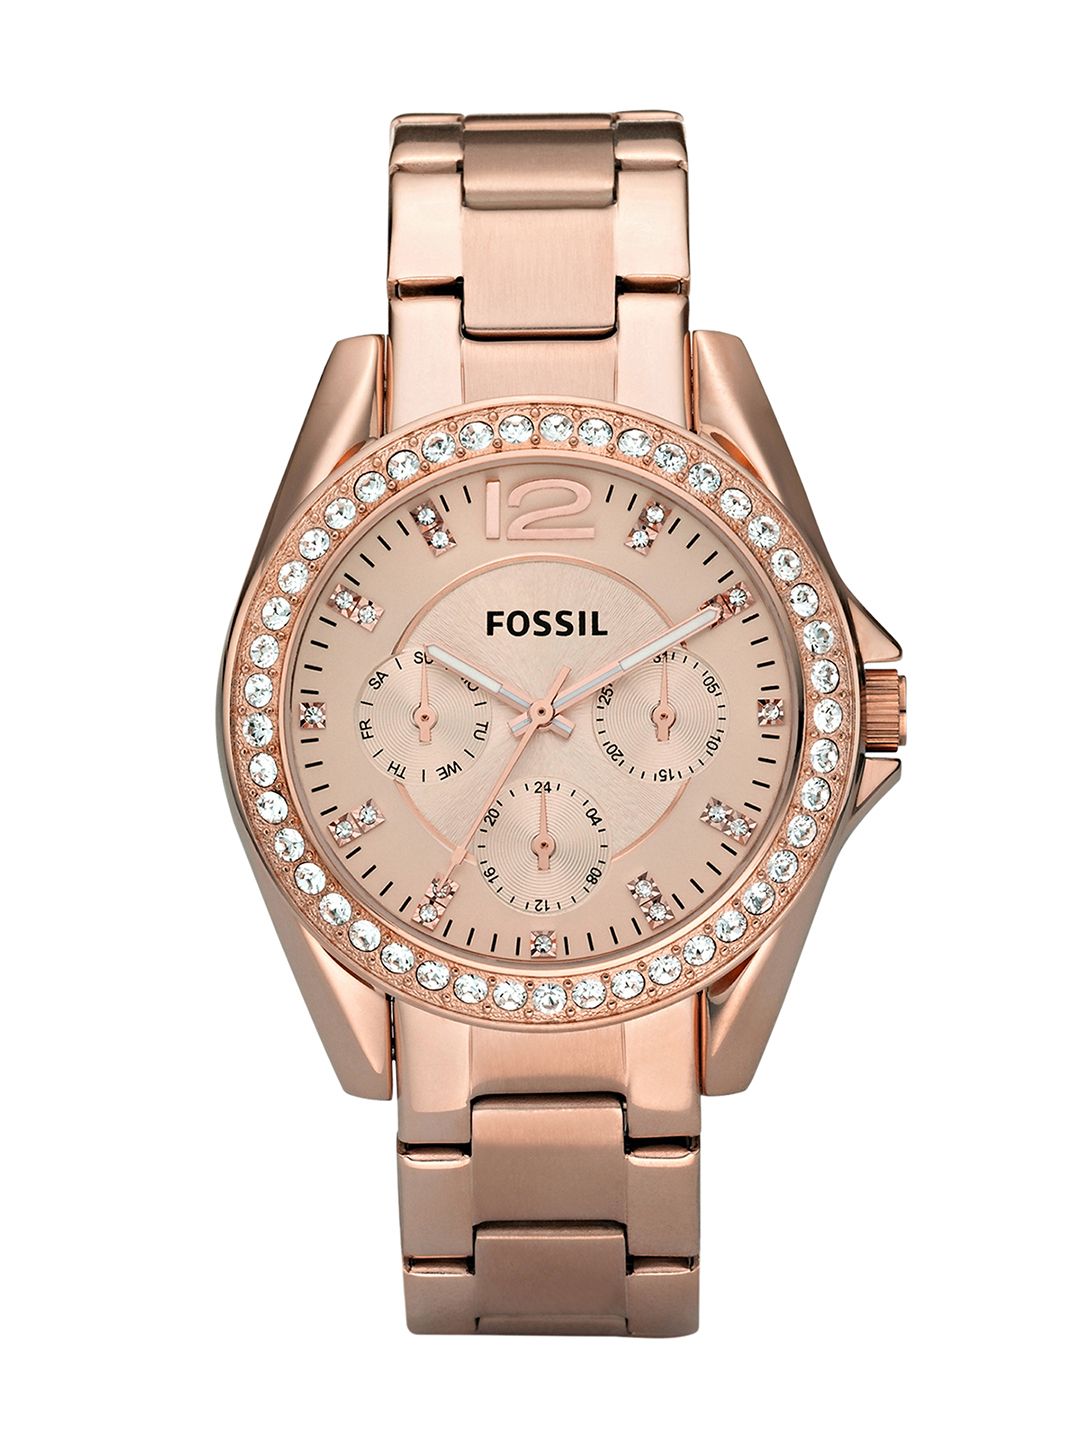 Fossil Women Rose Gold Analogue Watch Price in India